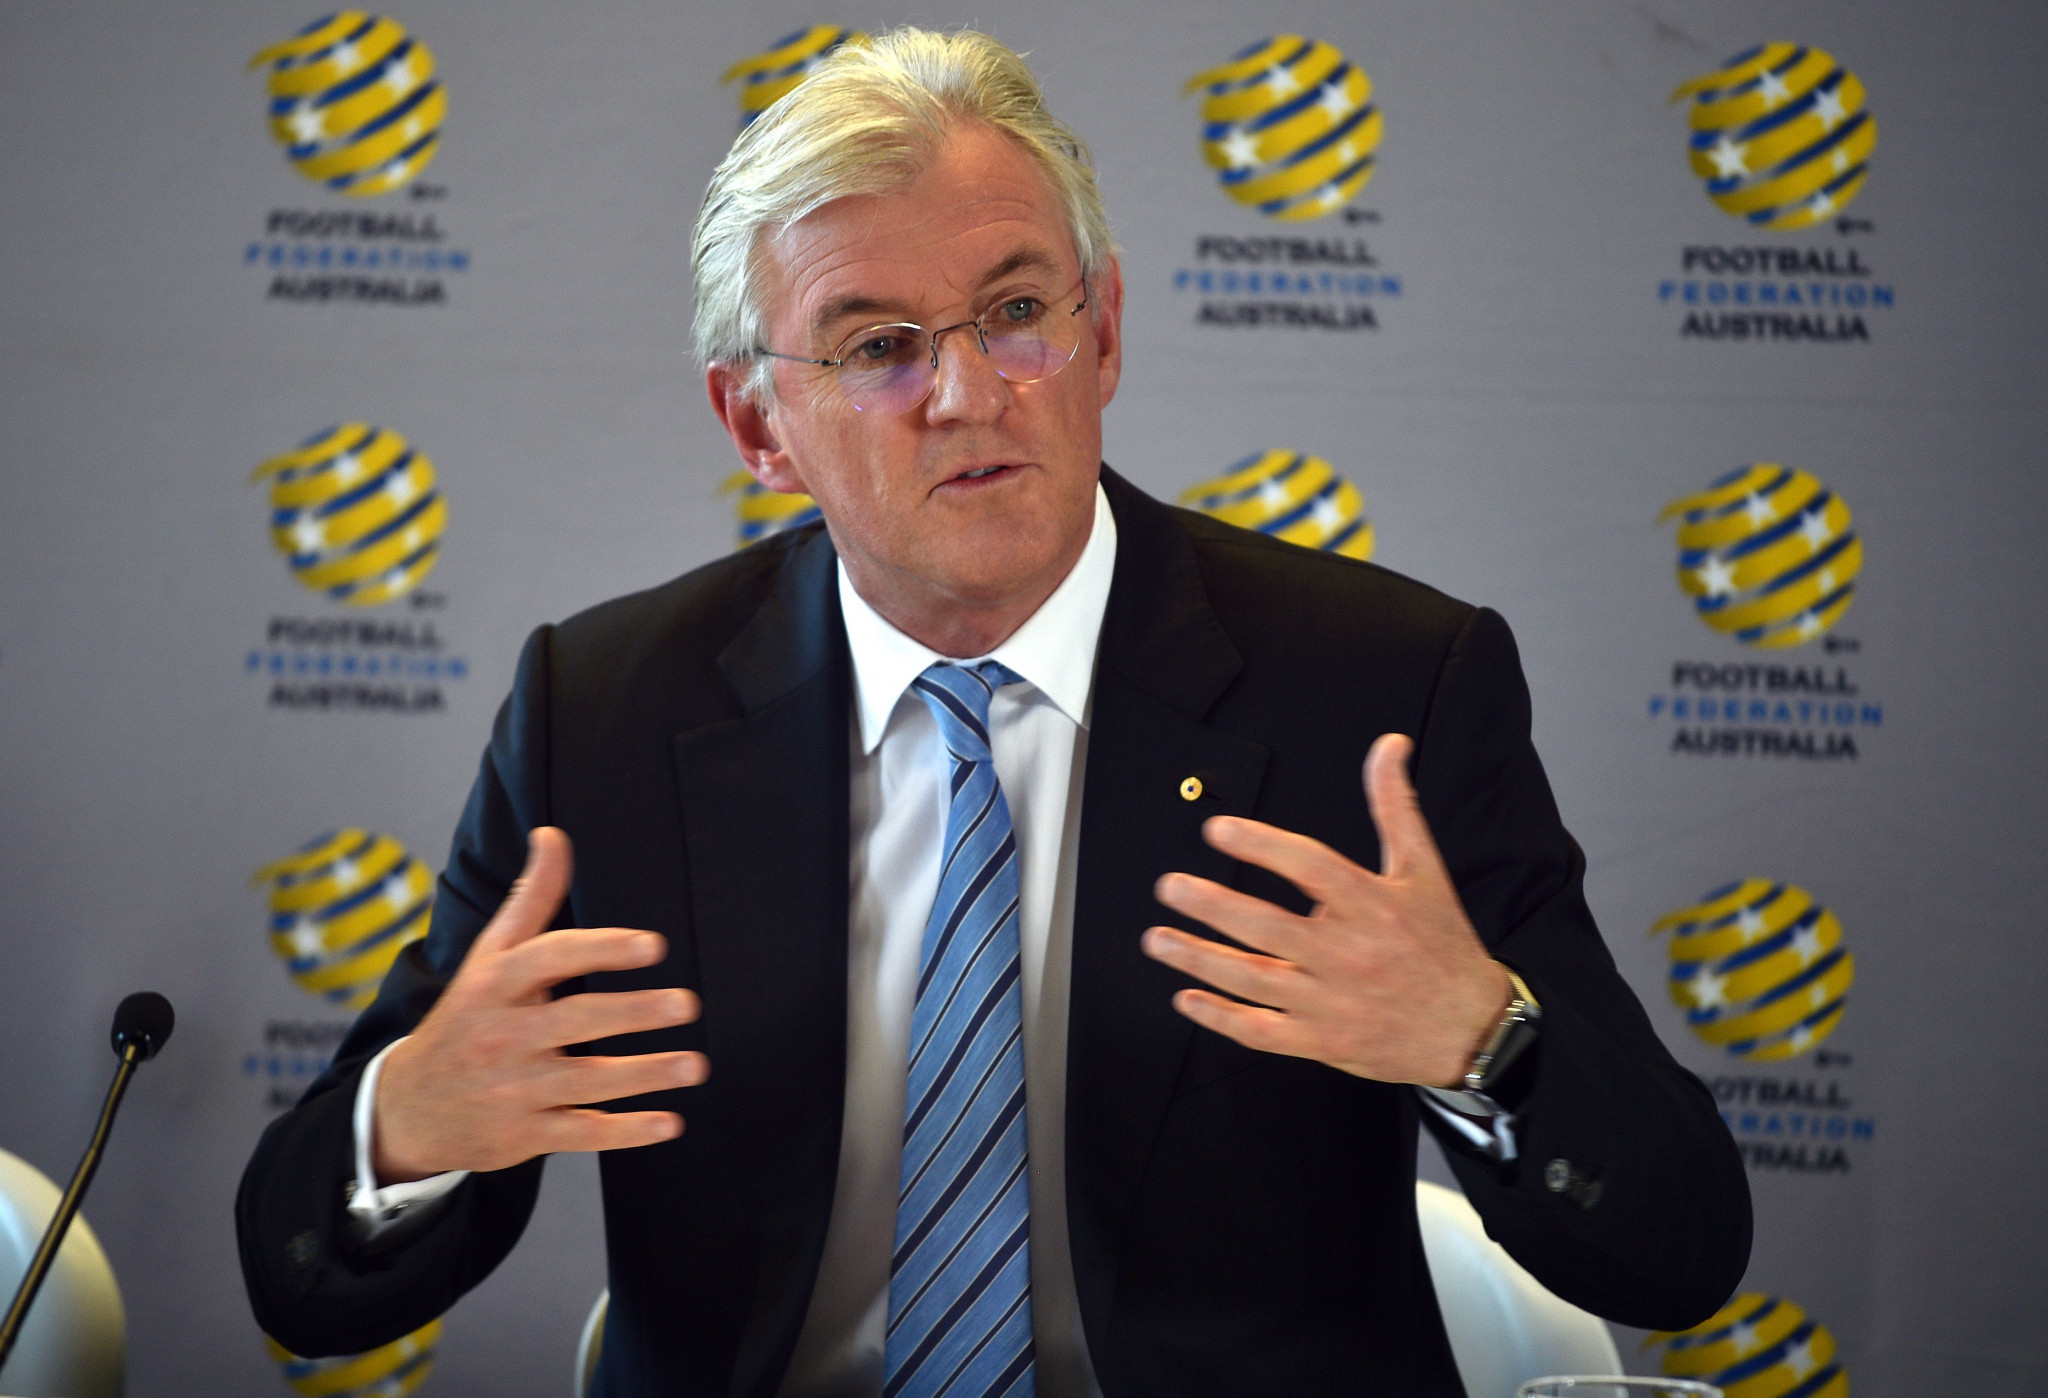 FIFA are set to take over the running of the Football Federation Australia, led by chairman Steven Lowy ©Getty Images